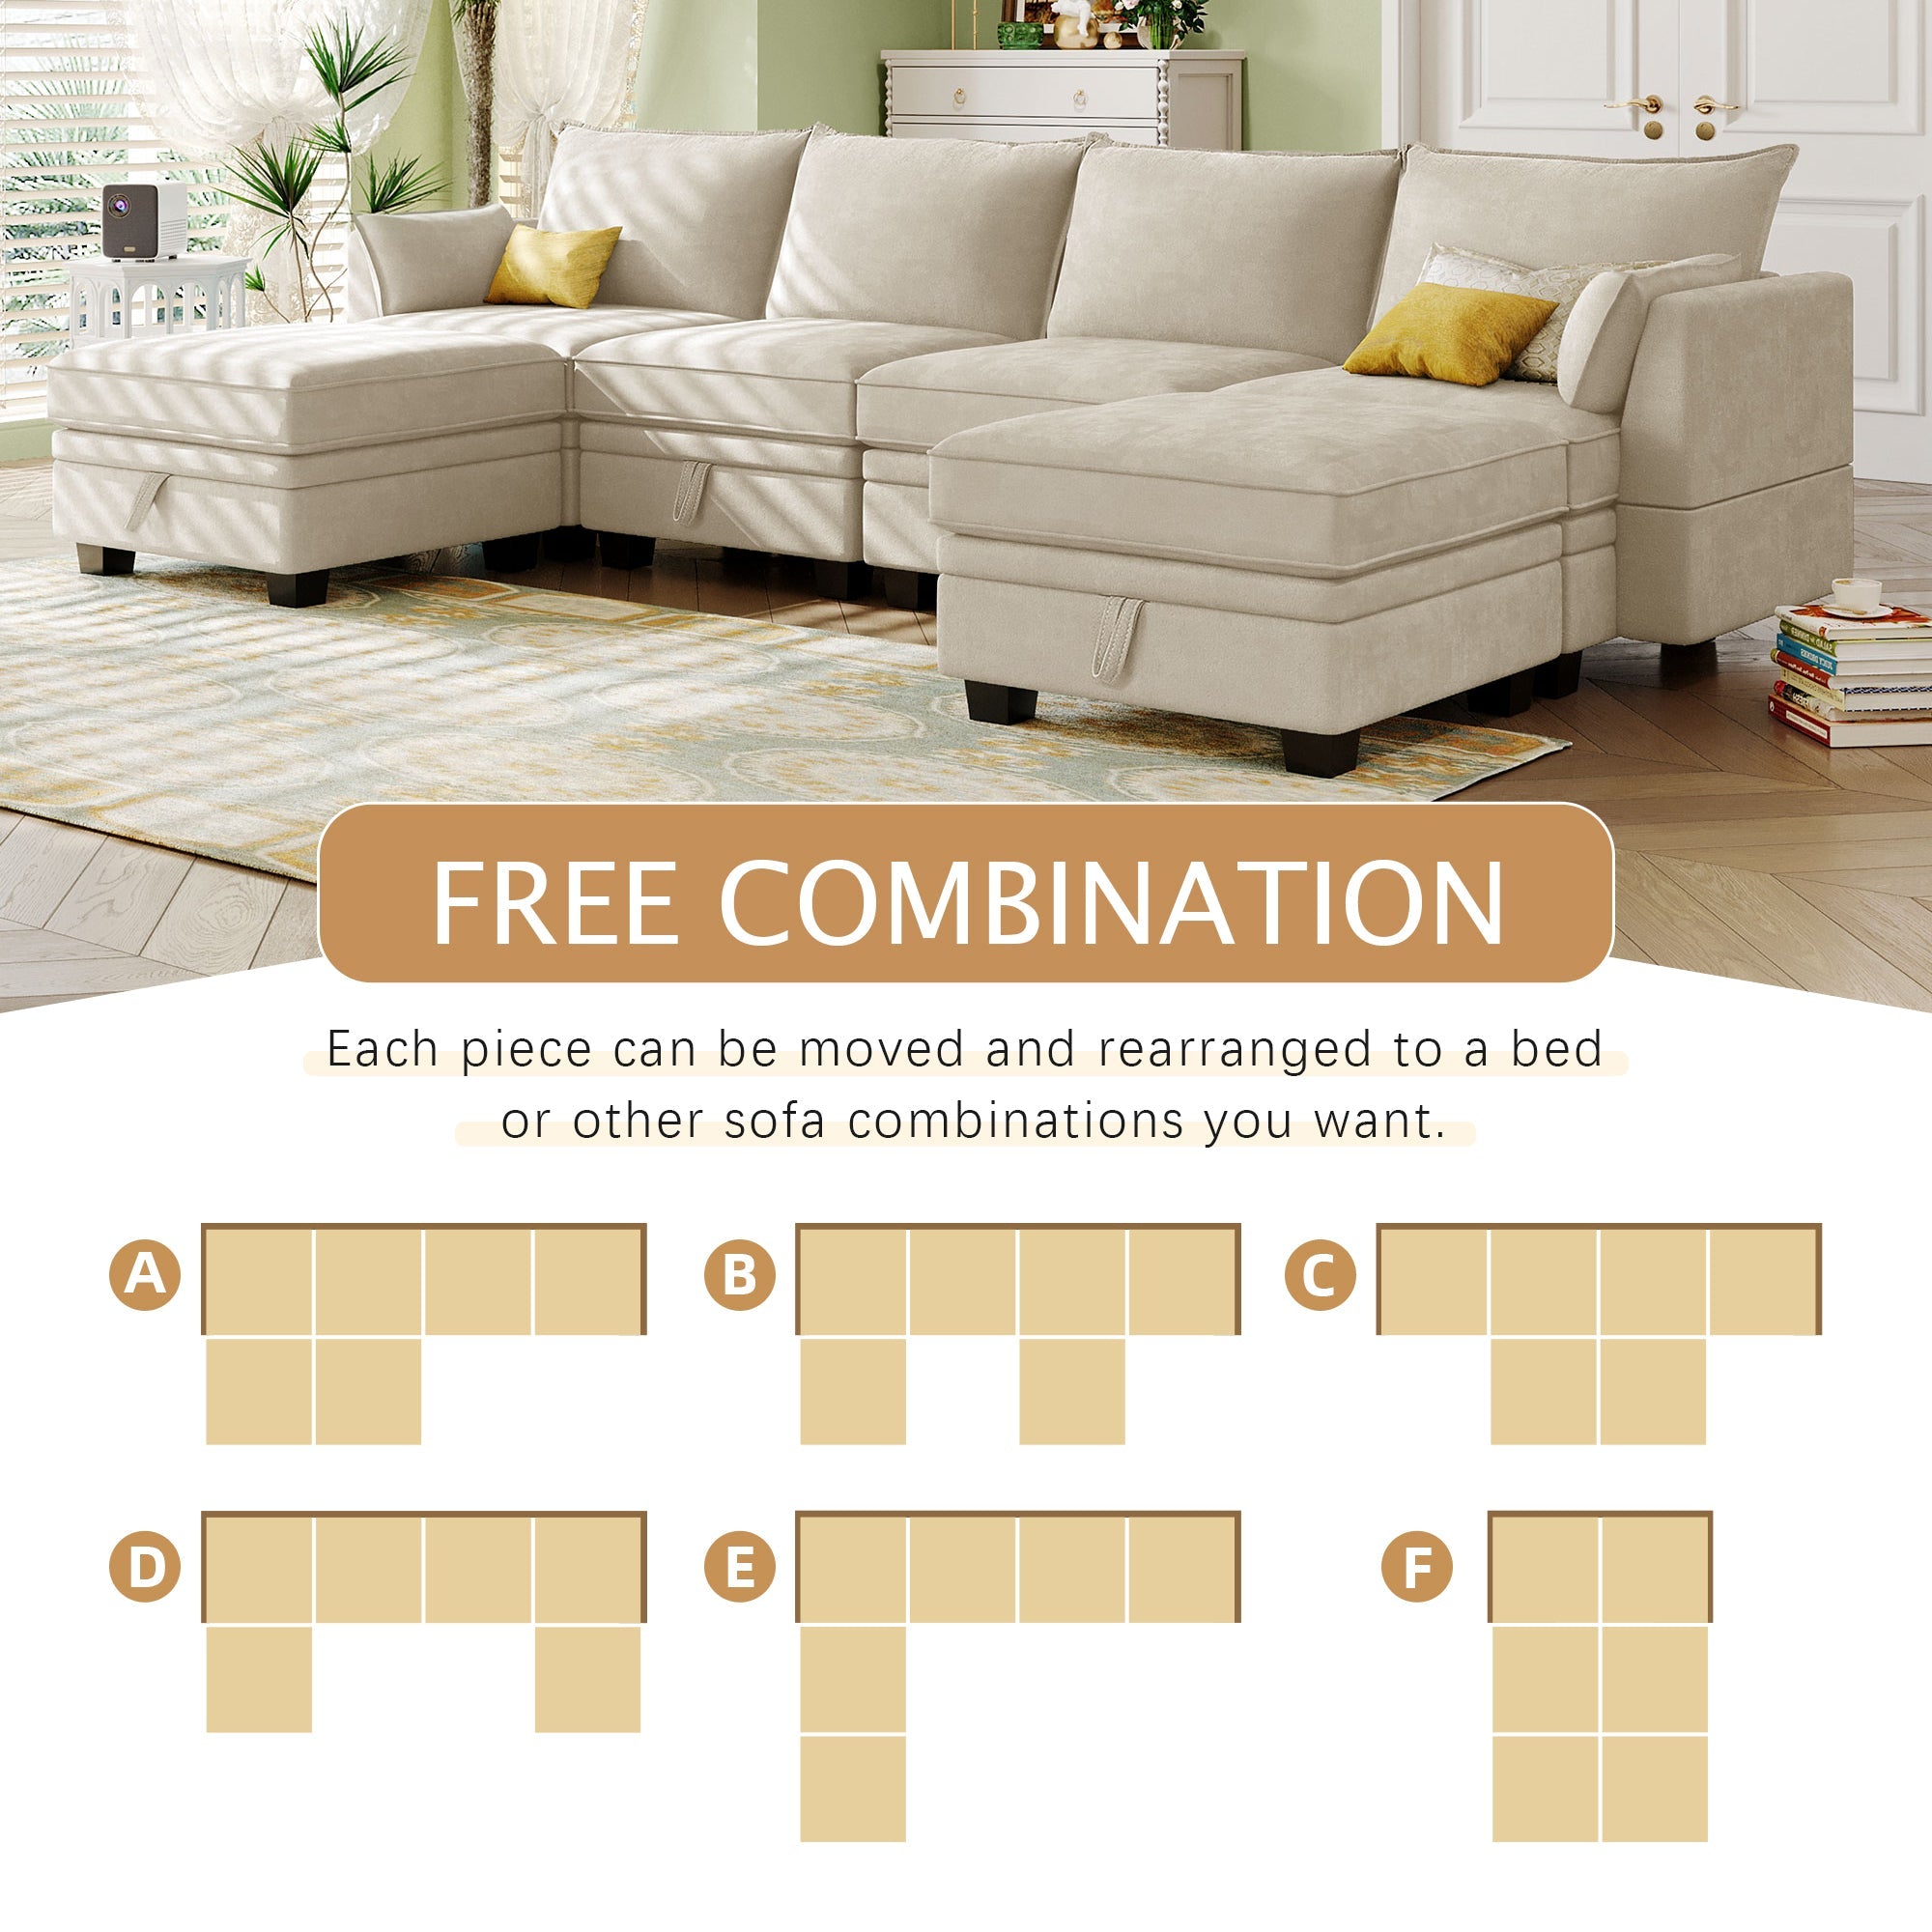 Beige Linen Modular Sectional Sofa with Storage-Sleeper Sectionals-American Furniture Outlet